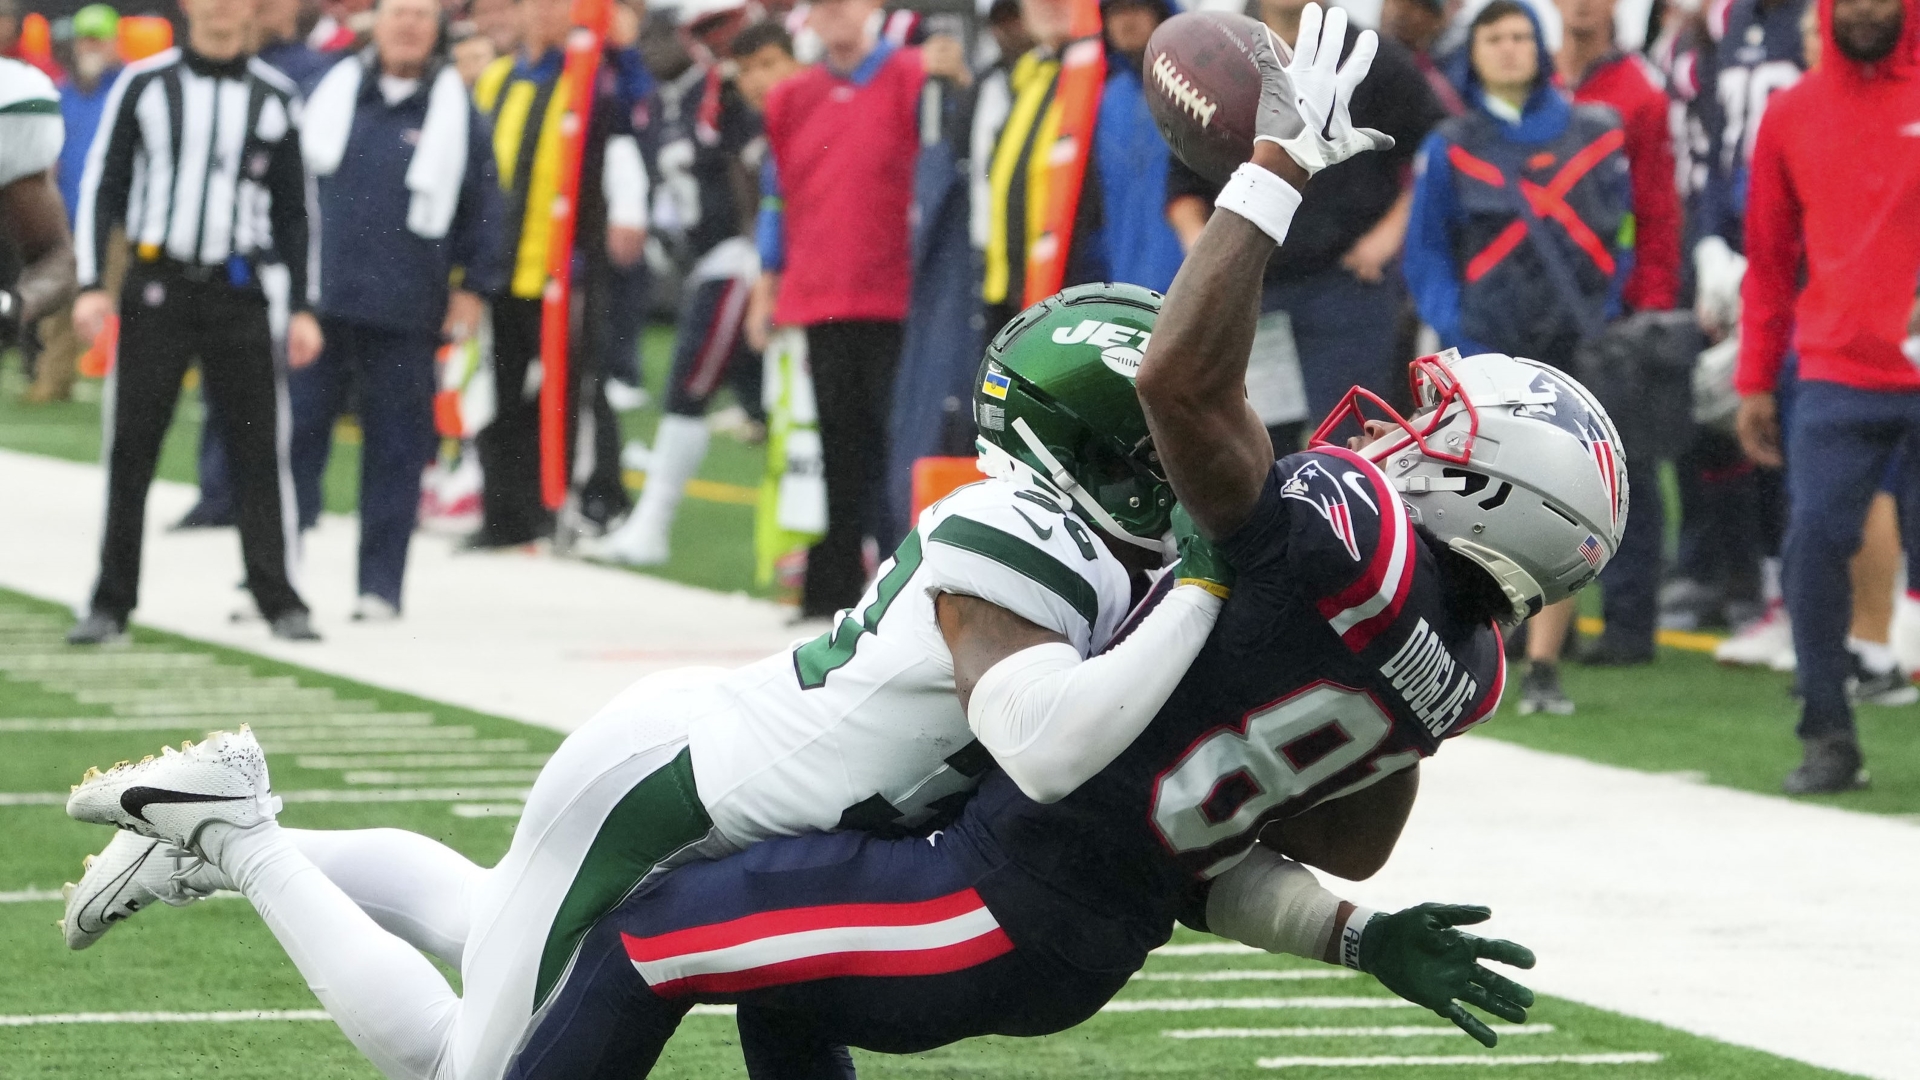 Demario Douglas Agrees With Patriots Fans’ View Of Non-DPI Call